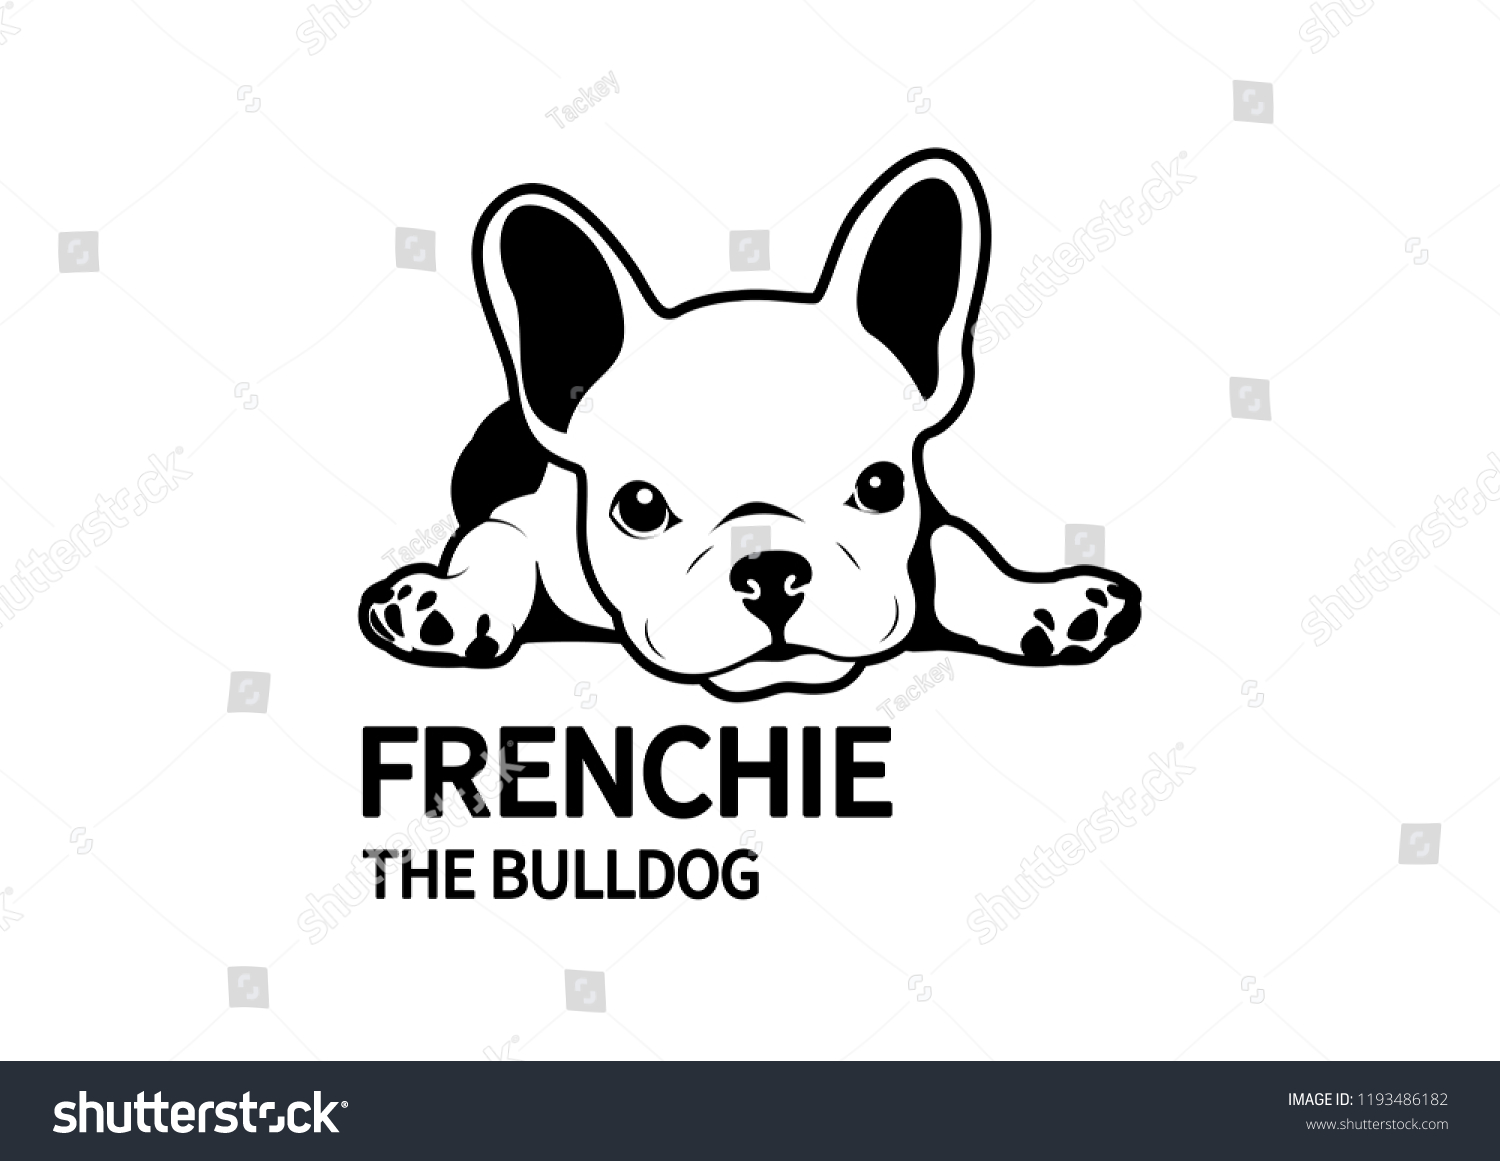 79,863 French puppy bulldog Images, Stock Photos & Vectors | Shutterstock